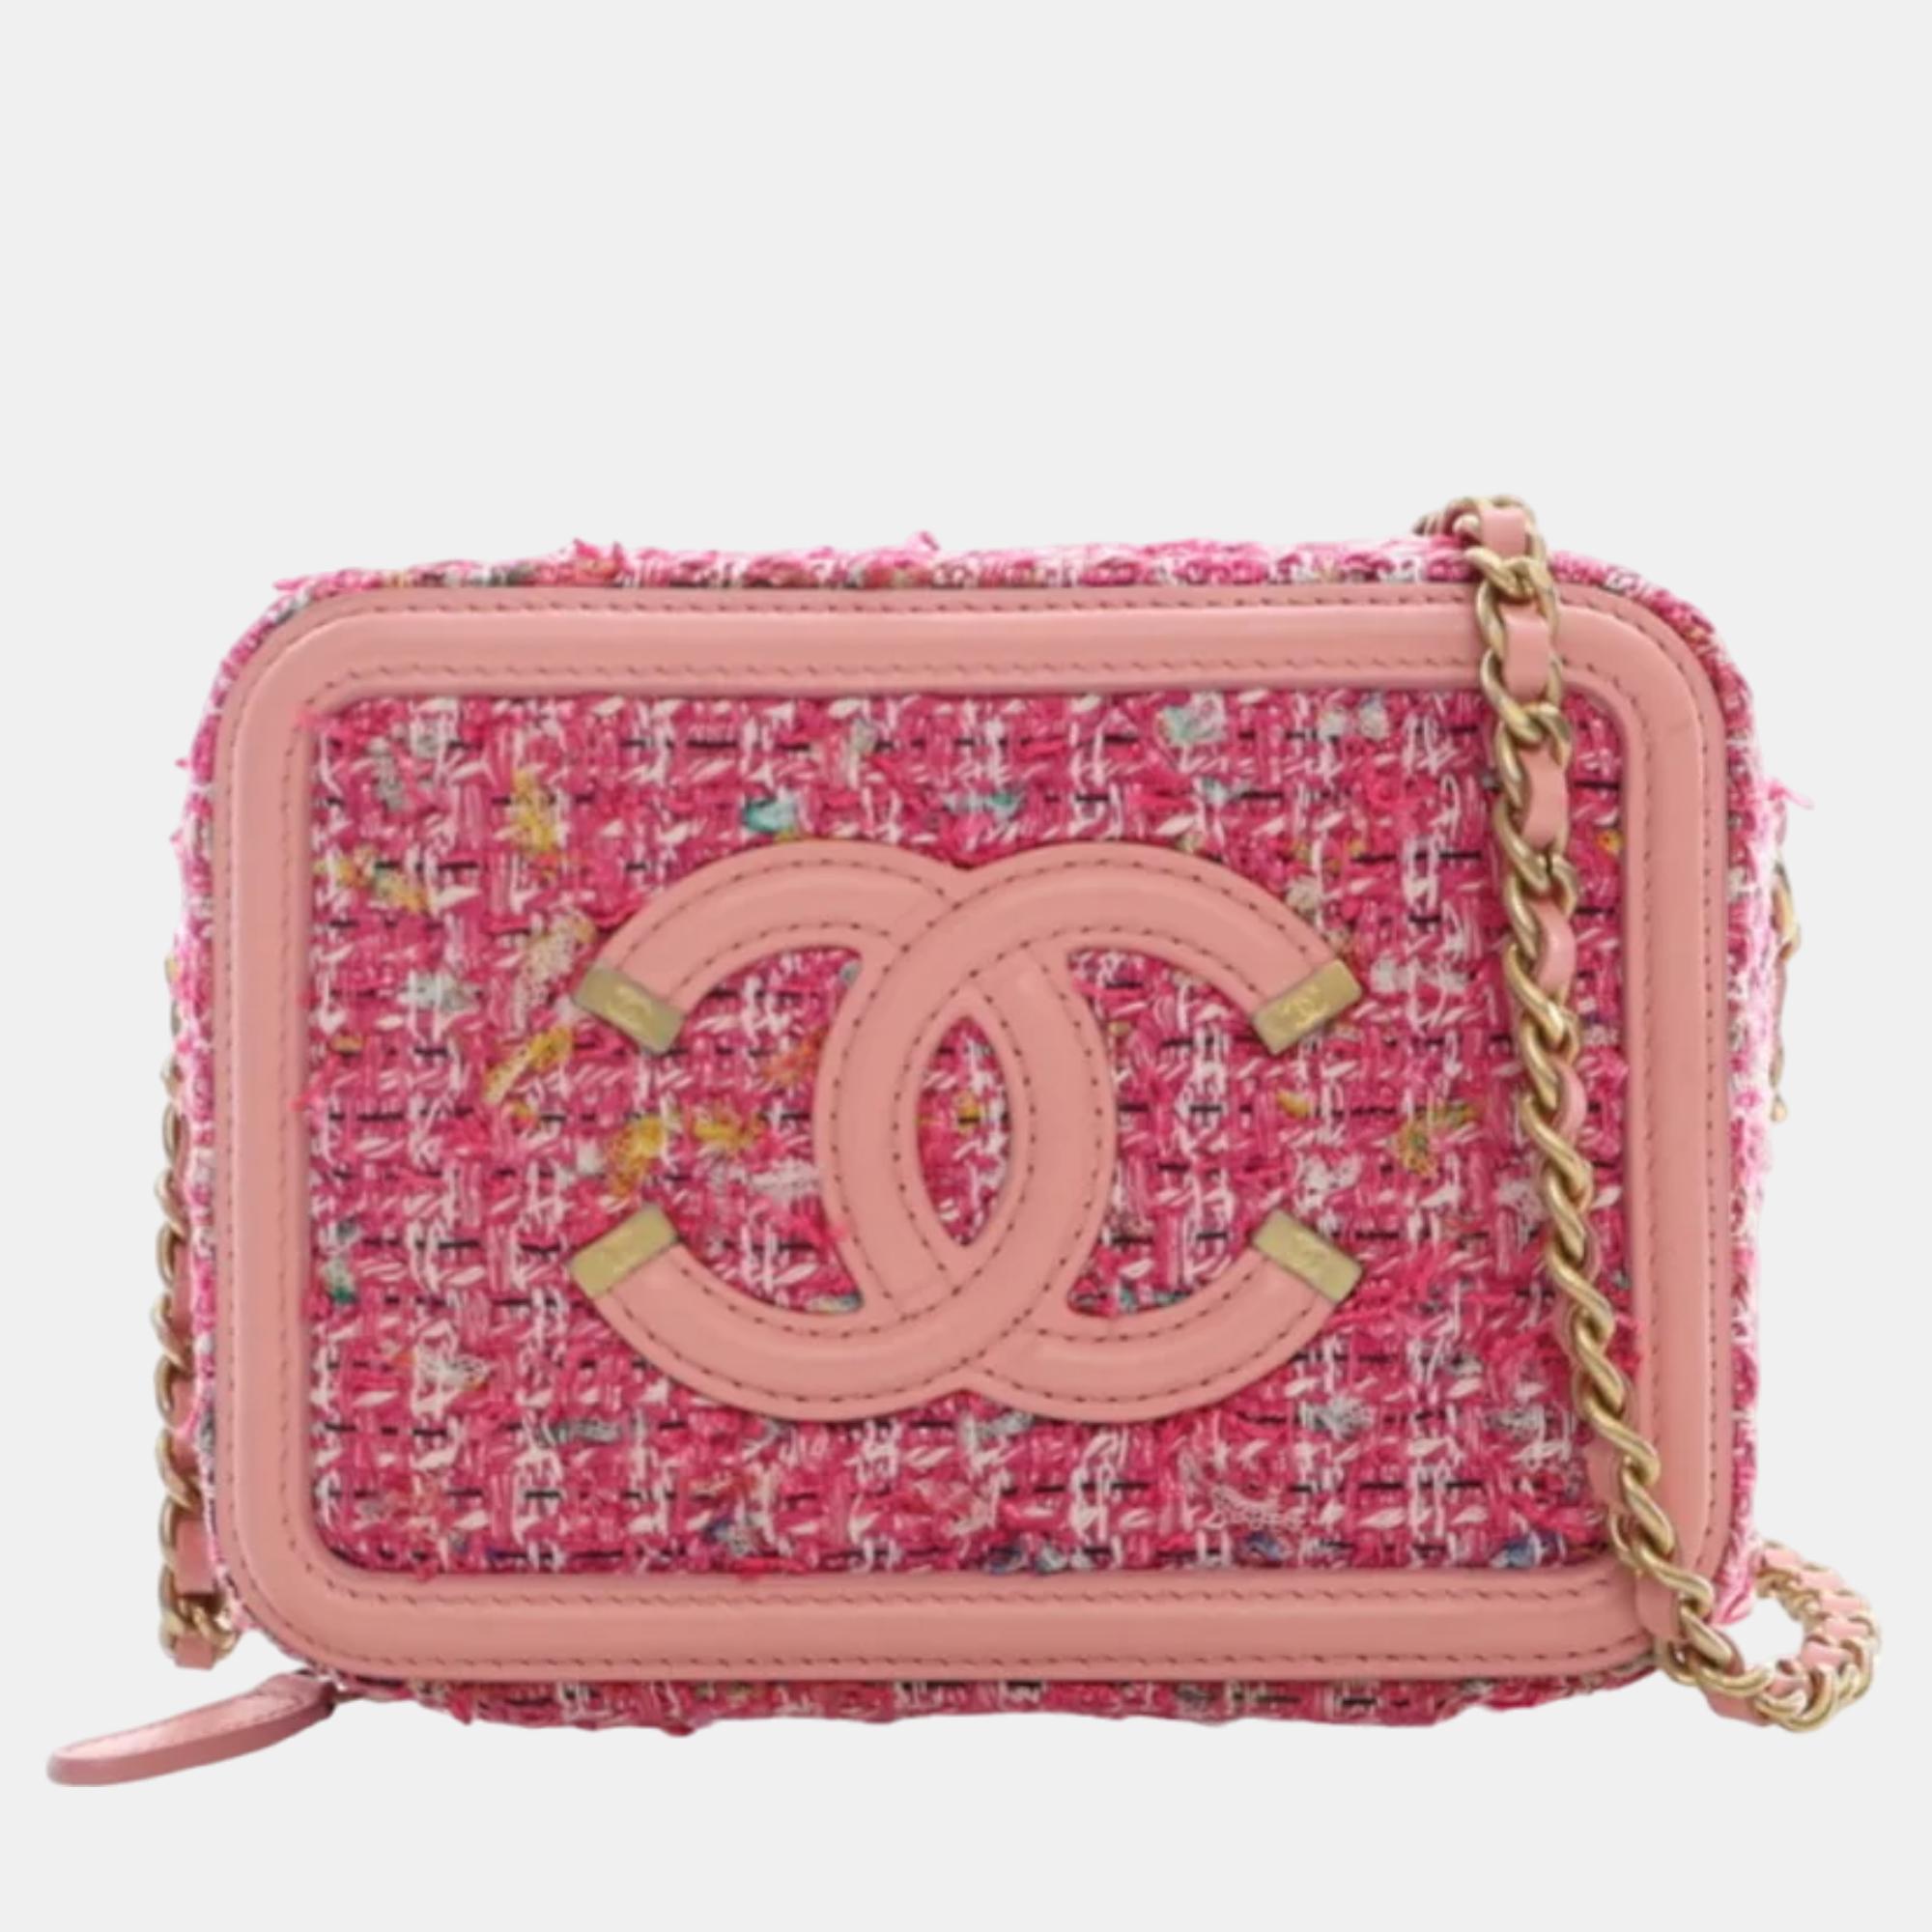 Chanel pink tweed and leather filigree shoulder bags